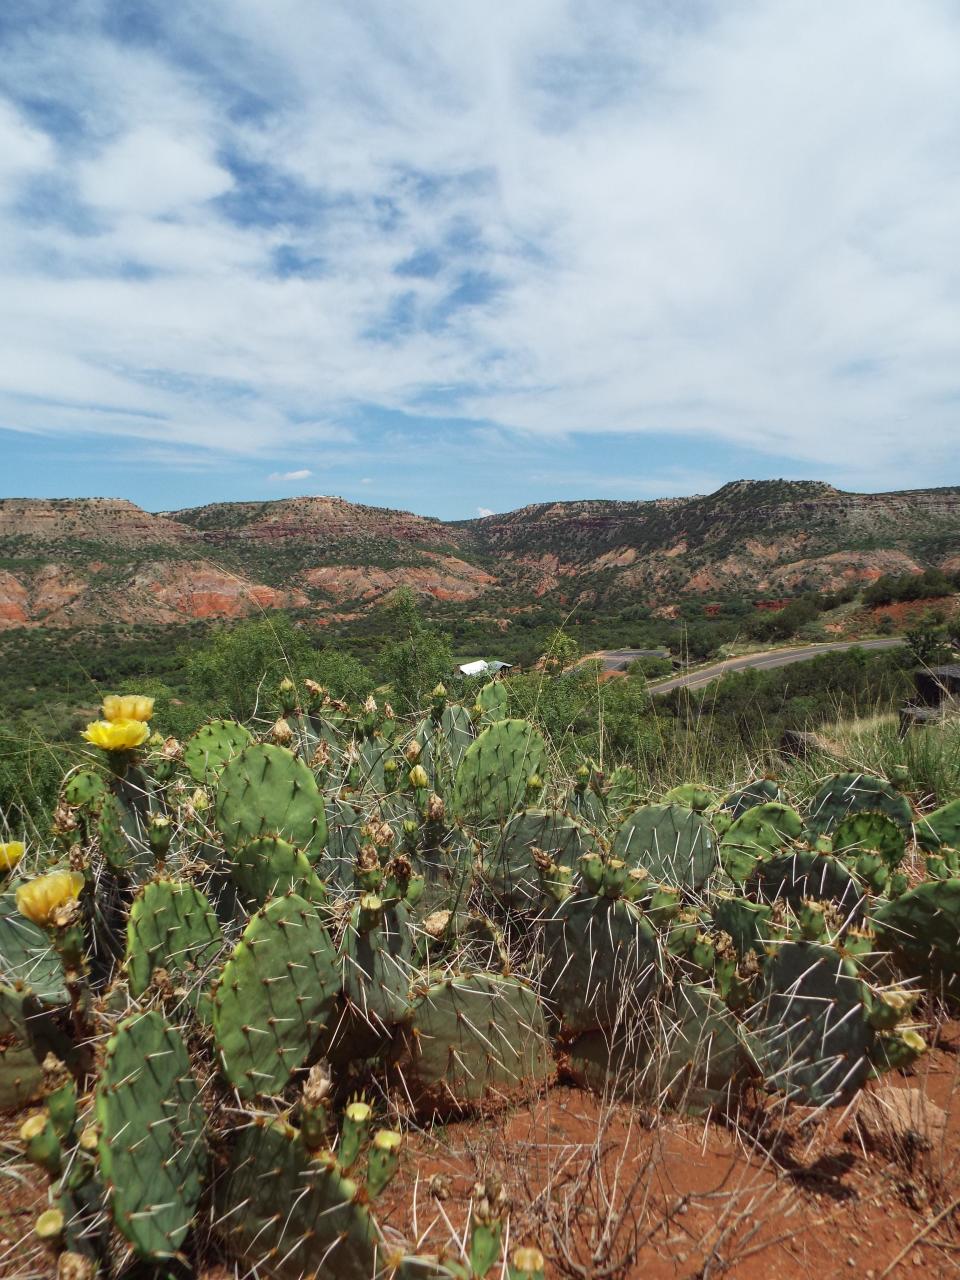 Palo Duro Canyon looks more beautiful than ever before with recent rainfall. But looks can be deceiving and though it is open, visitors need to follow rules and stay within limits set by the park and first responders.